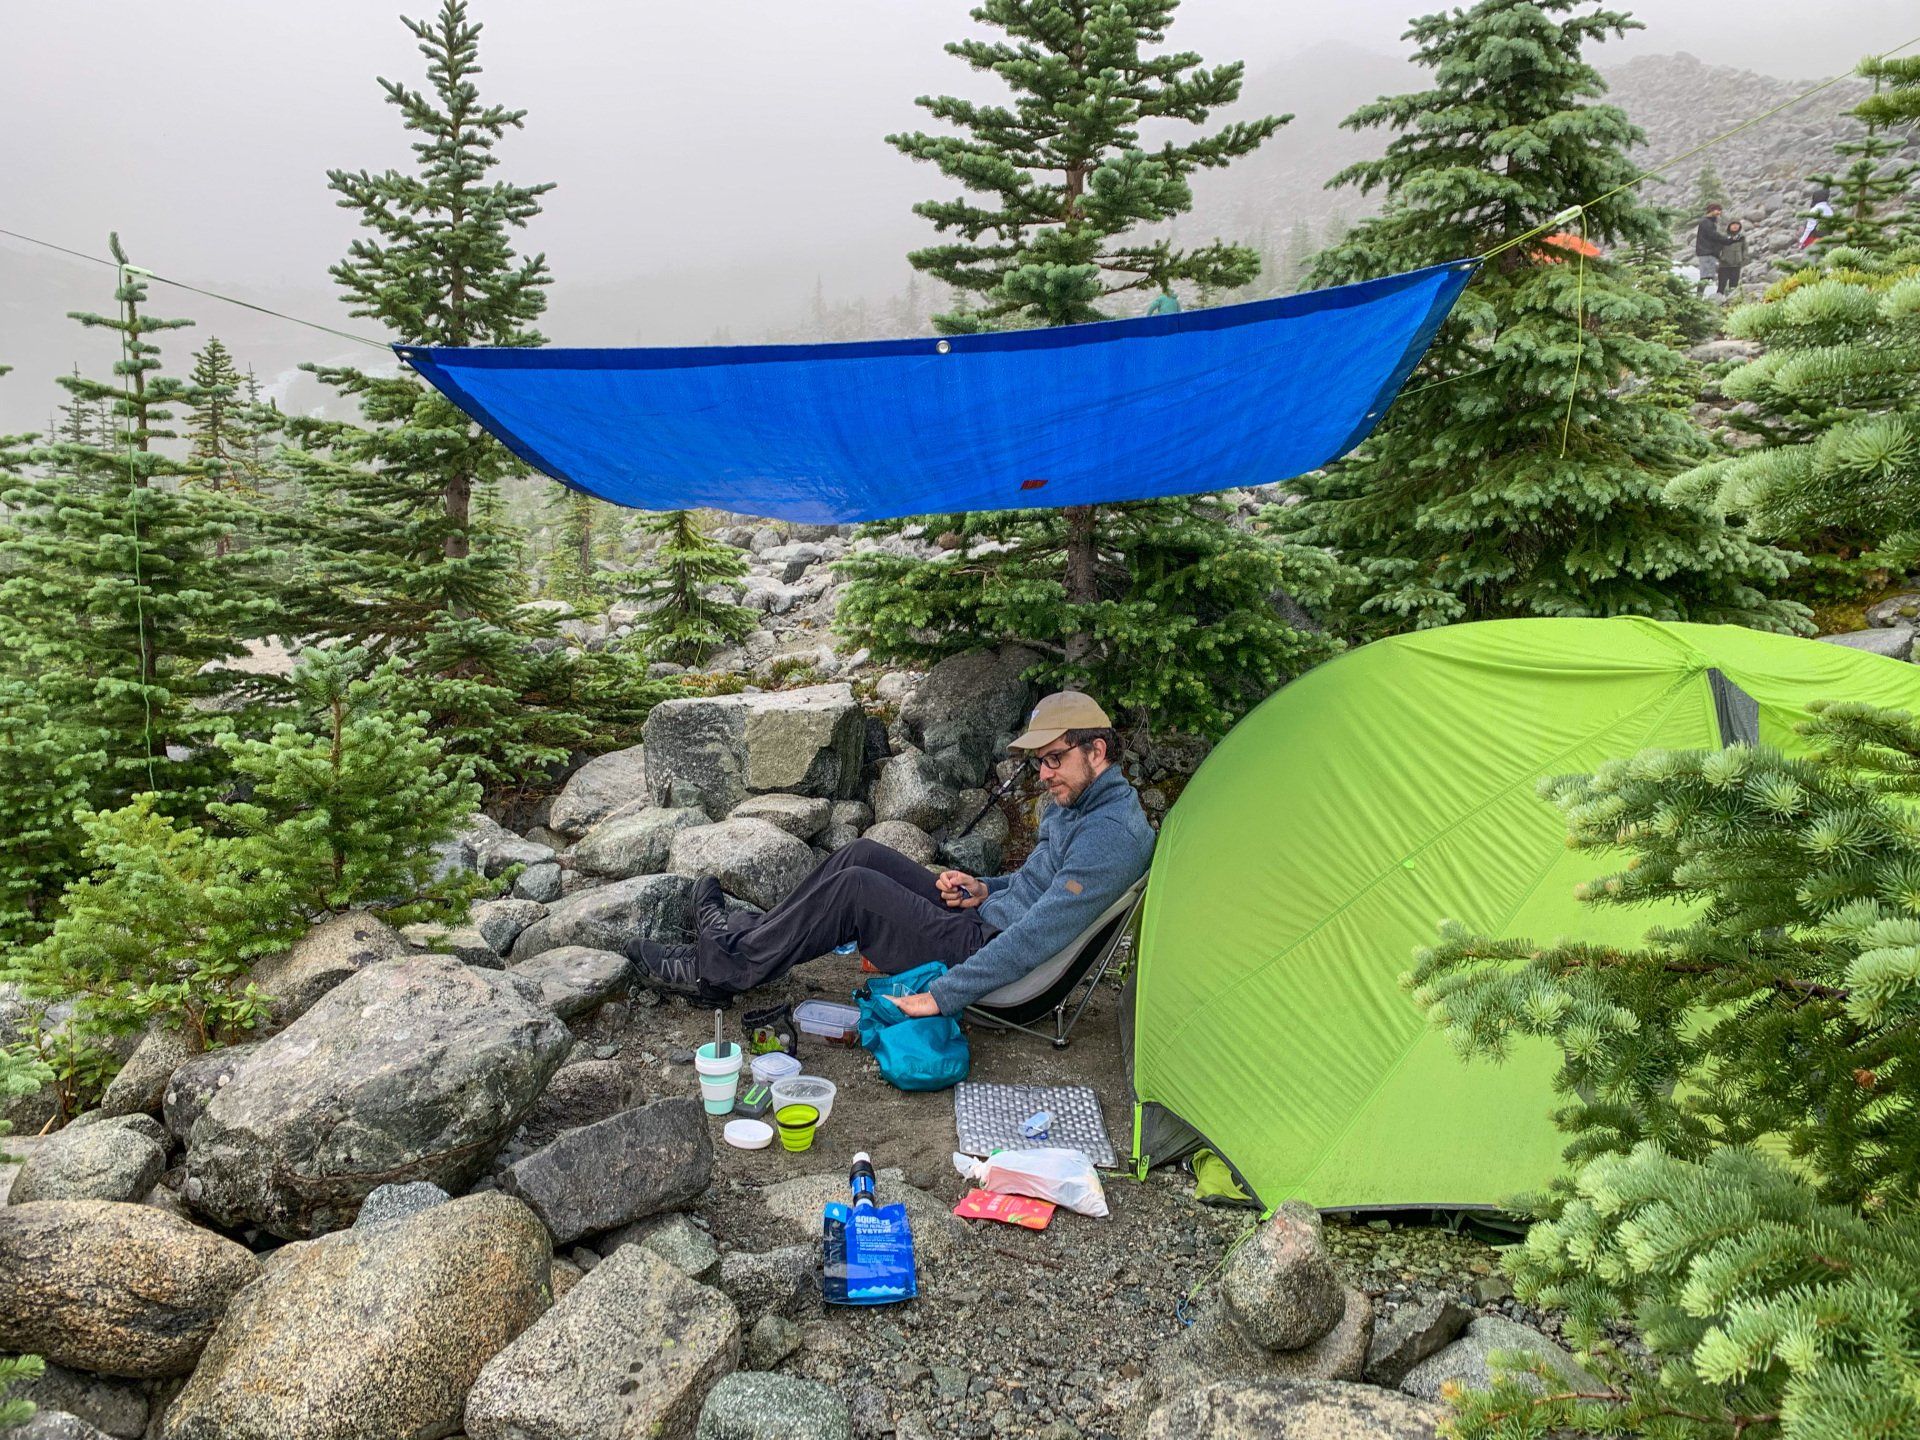 Nemo Dragonfly tent, a tarp hanging near it and a backpacker preparing breakfast. Joffre lakes provincial park, BC, Canada